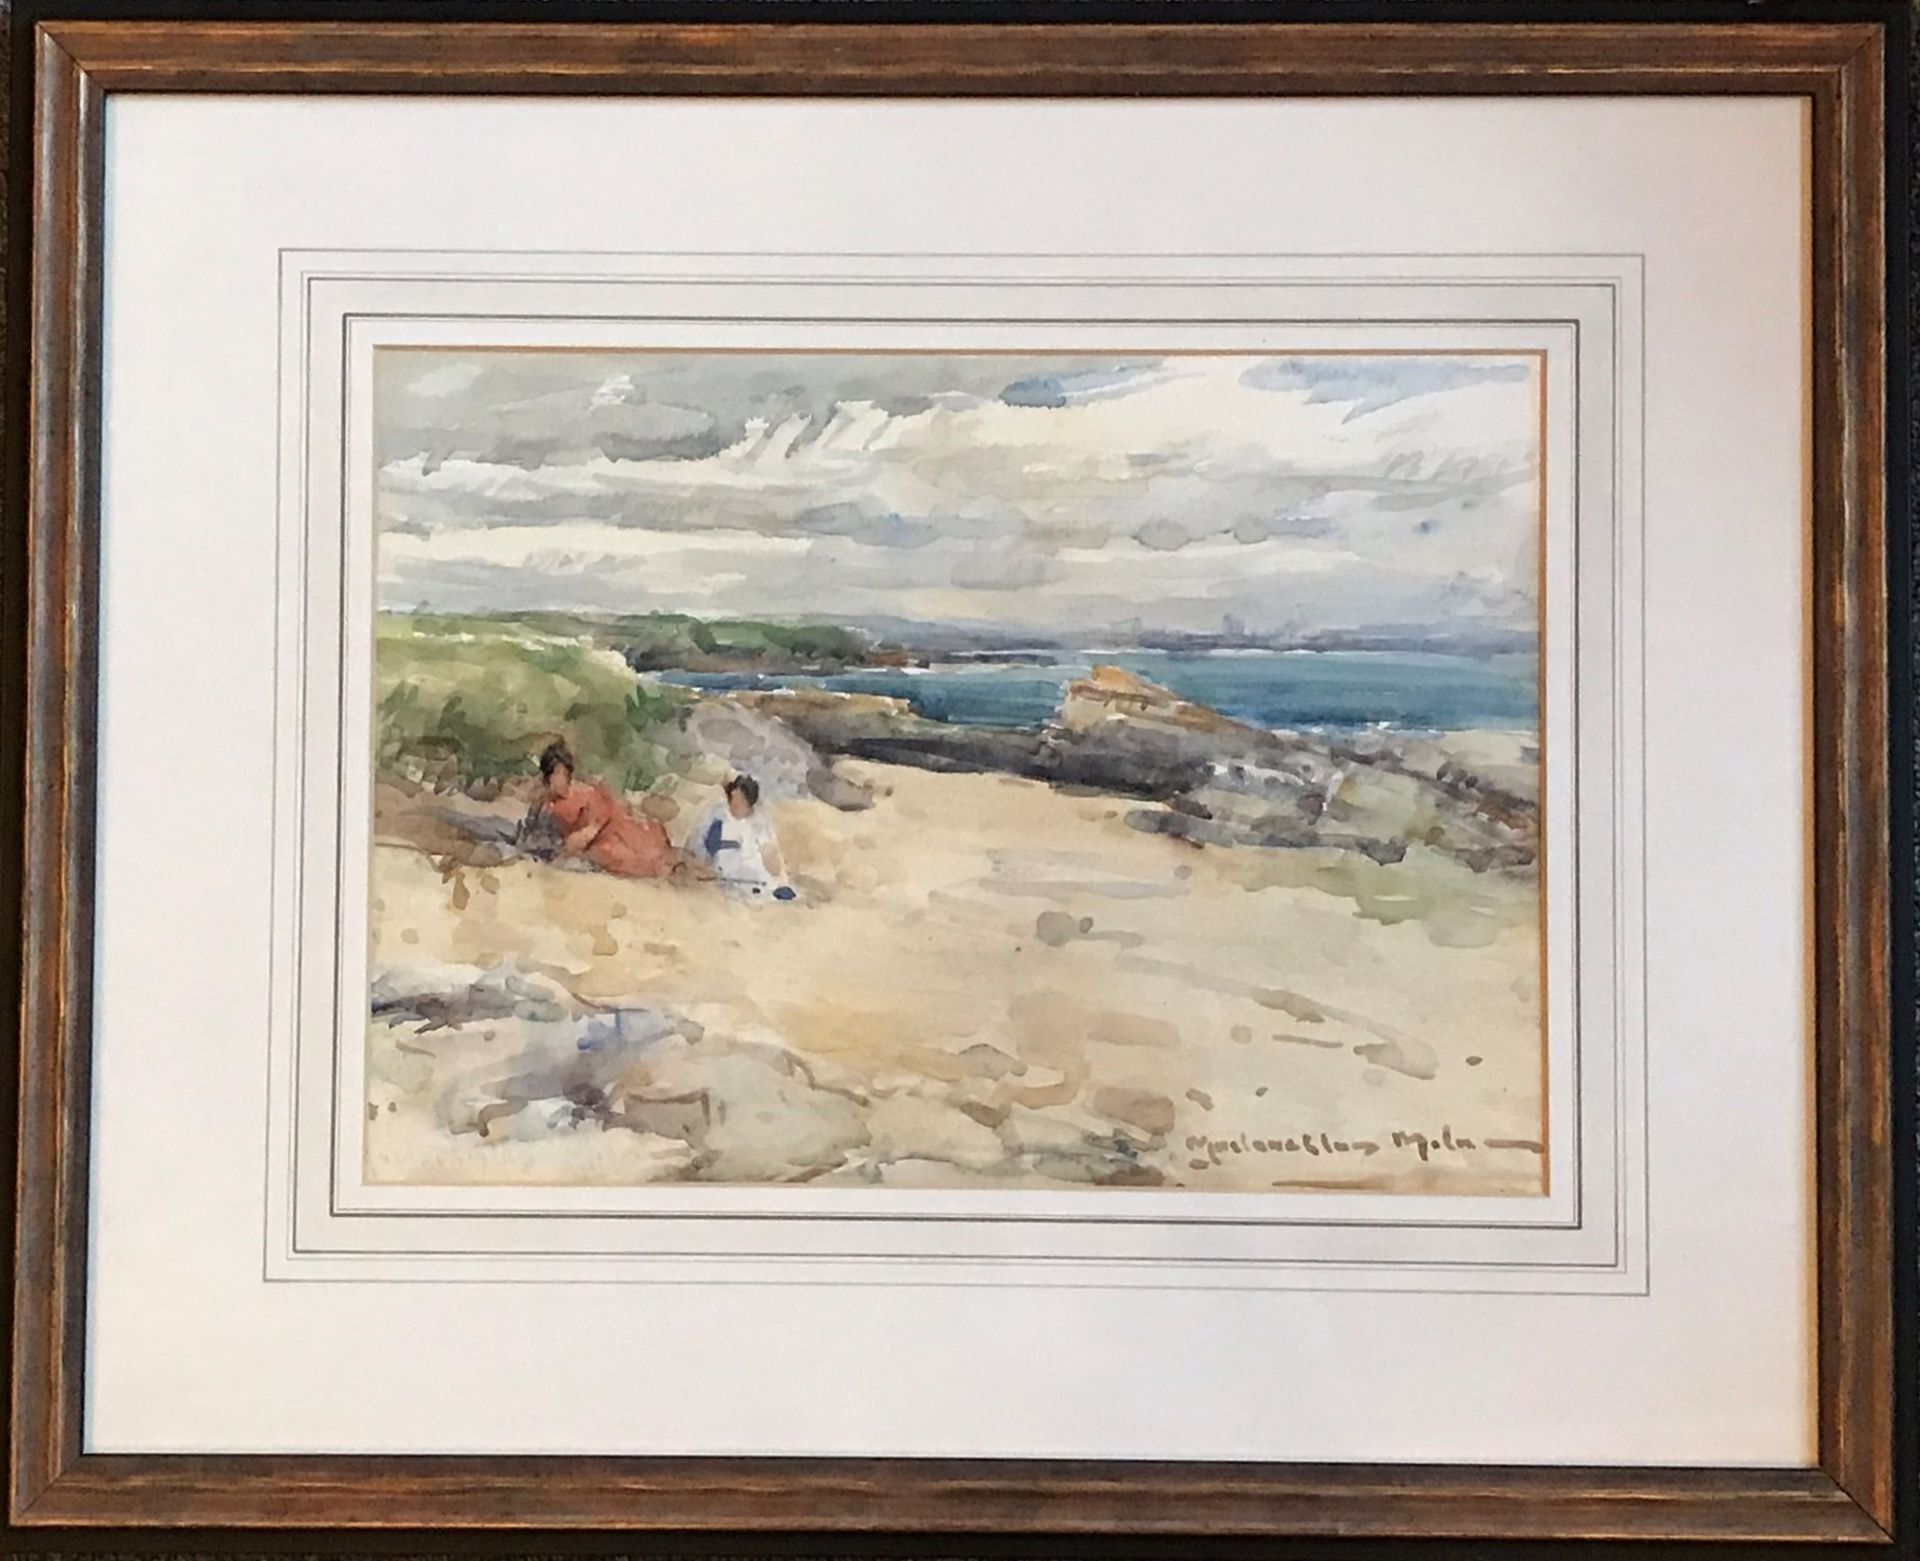 John Malaughlan Milne A.R.S.A, R.S.A, Watercolour Children On The Sand Dunes - Image 4 of 4